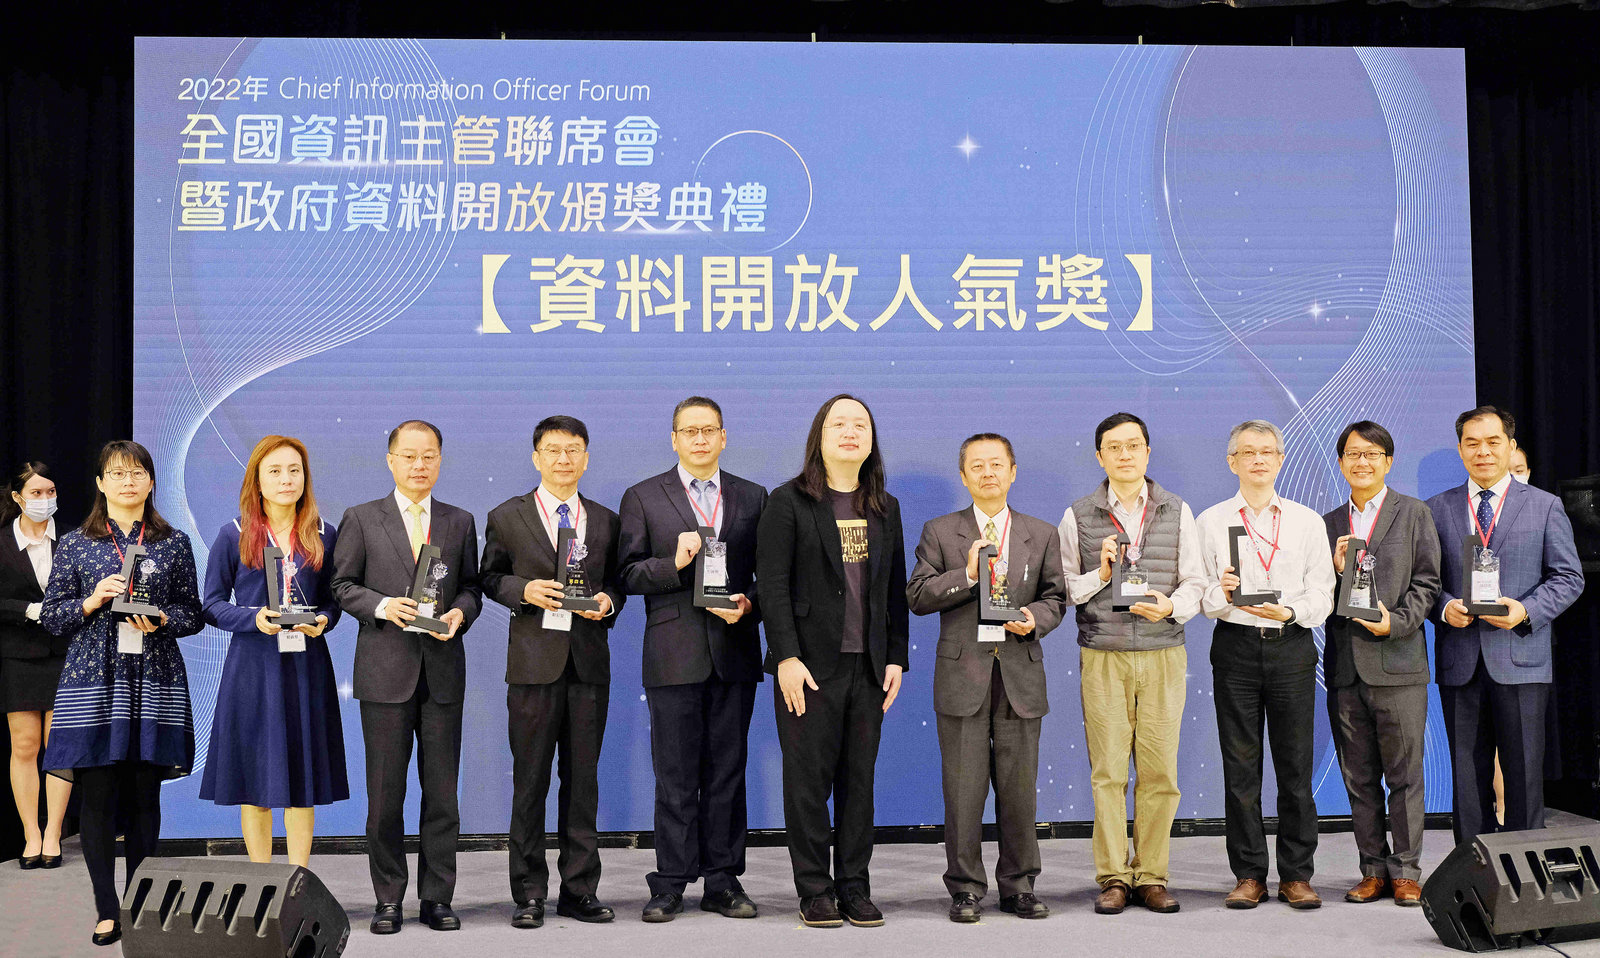 Tang Feng, Minister of Digital Affairs, and representatives of the winning units